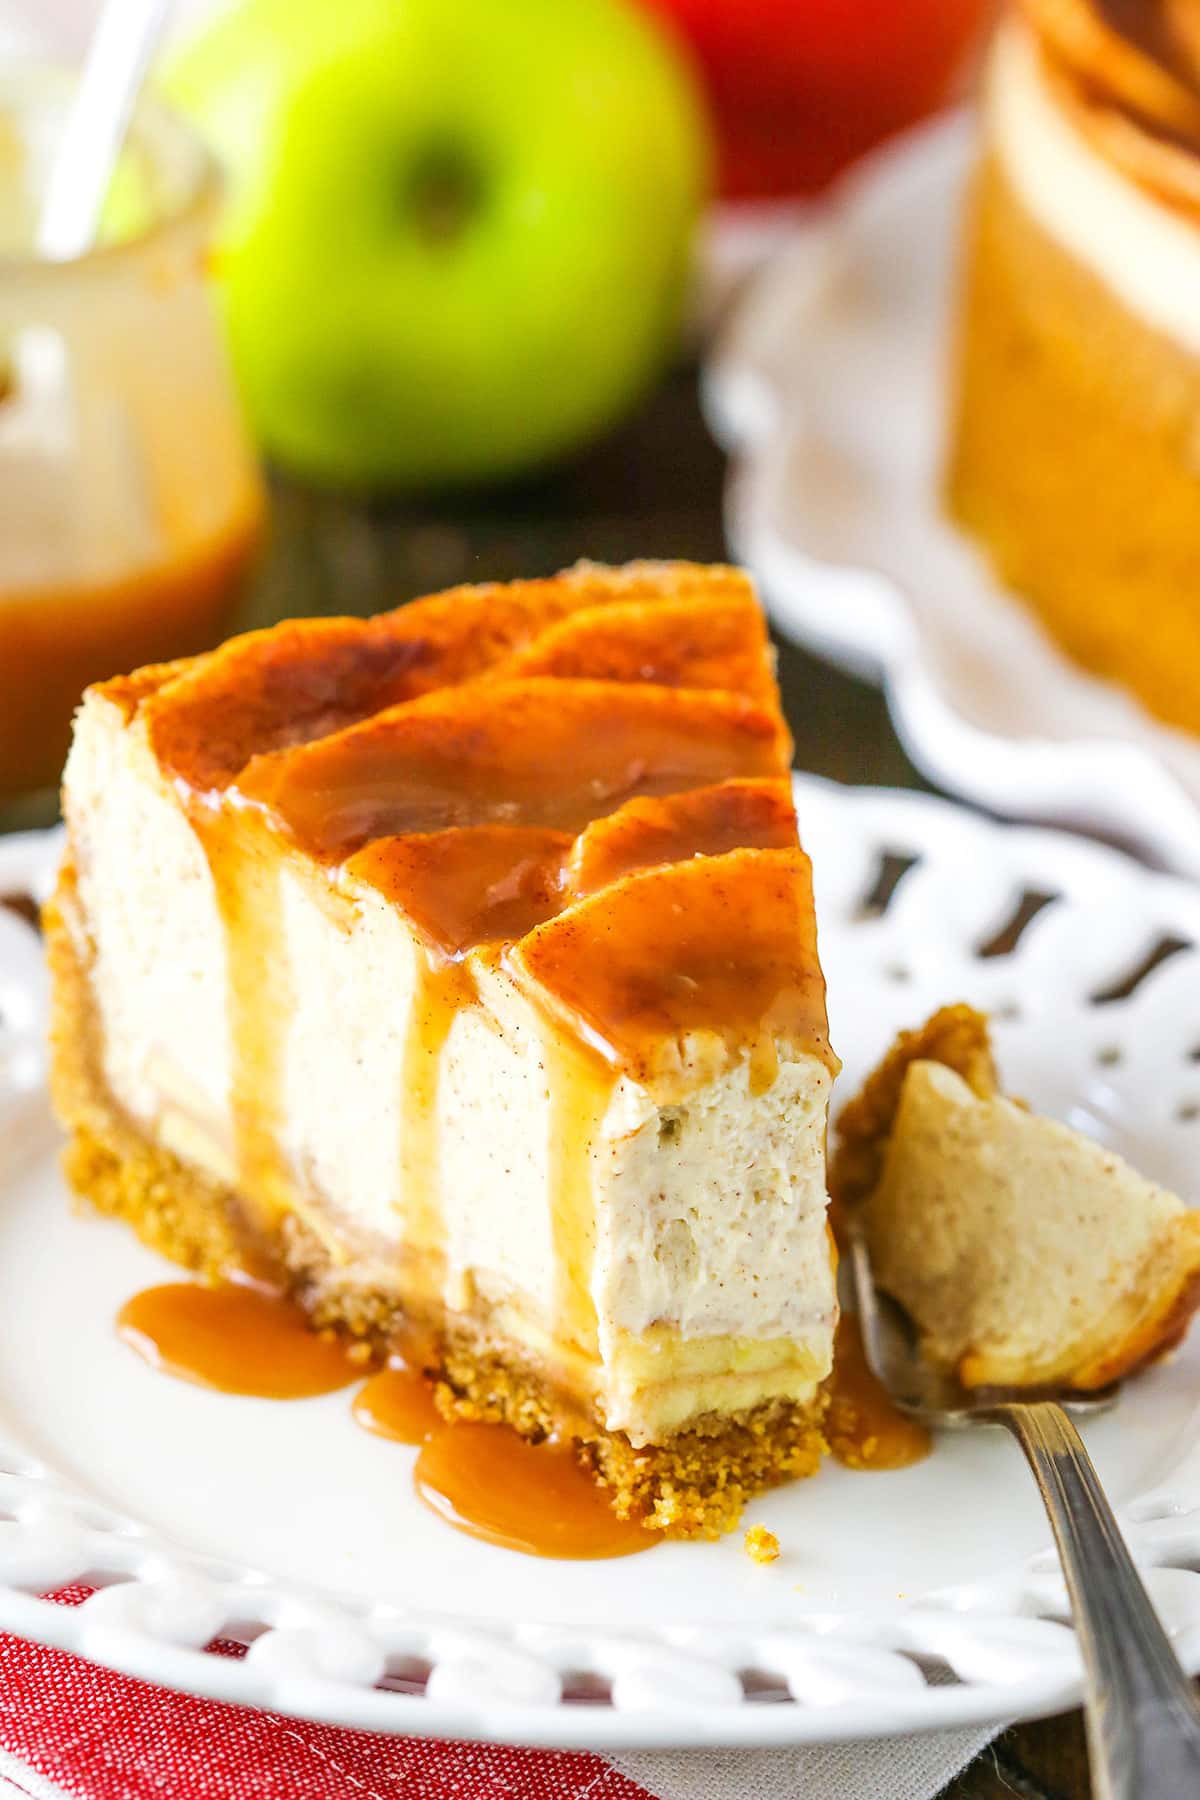 A slice of Caramel Apple Cheesecake with a bite removed next to a fork on a white plate